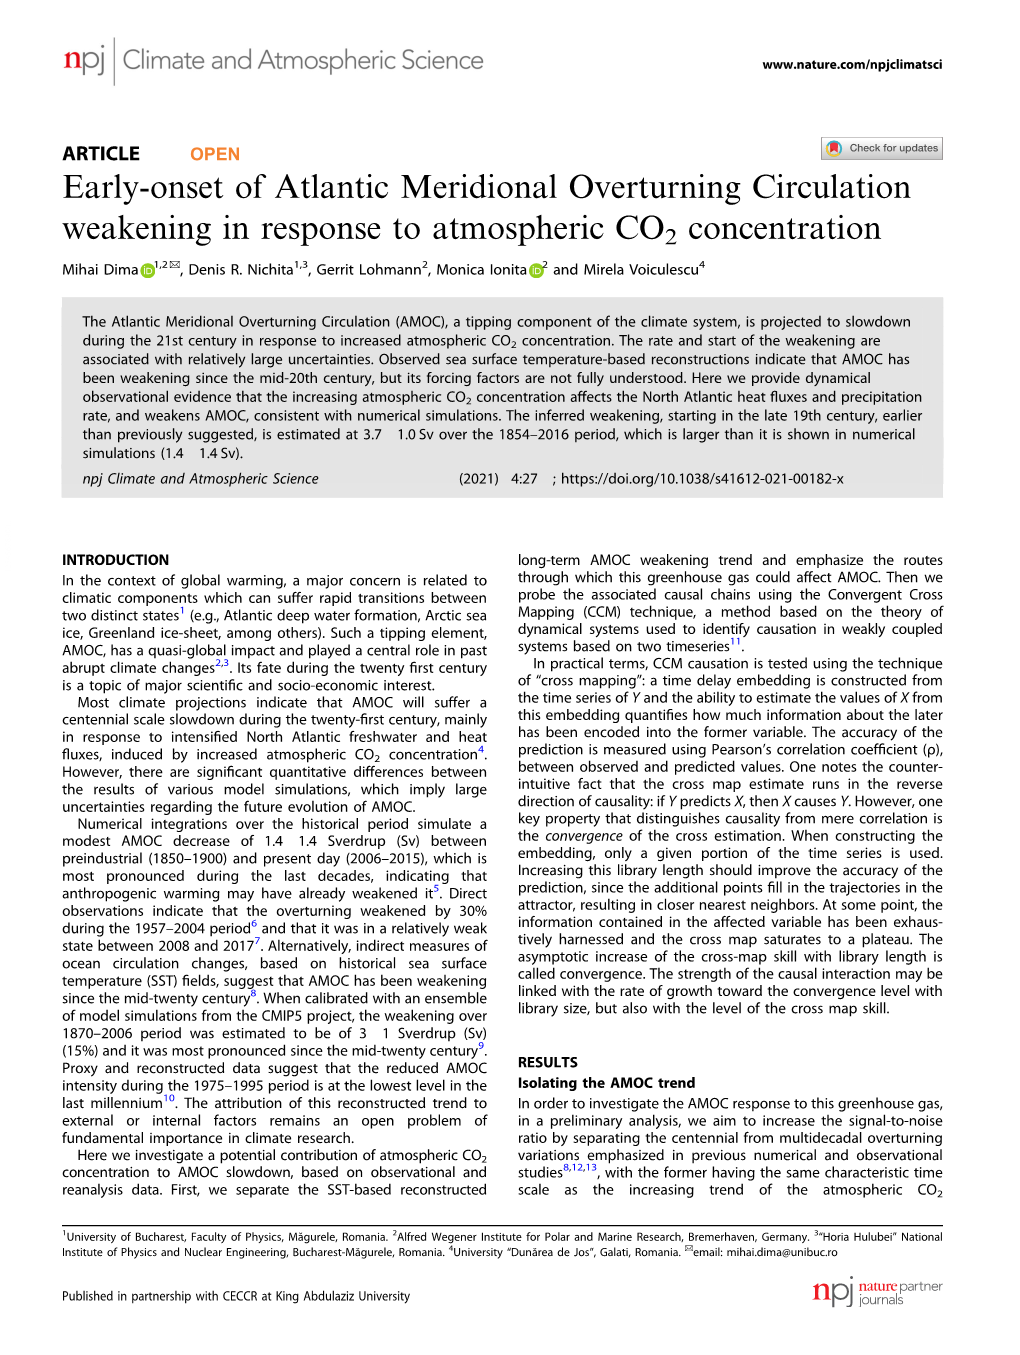 Early-Onset of Atlantic Meridional Overturning Circulation Weakening in Response to Atmospheric CO2 Concentration ✉ Mihai Dima 1,2 , Denis R